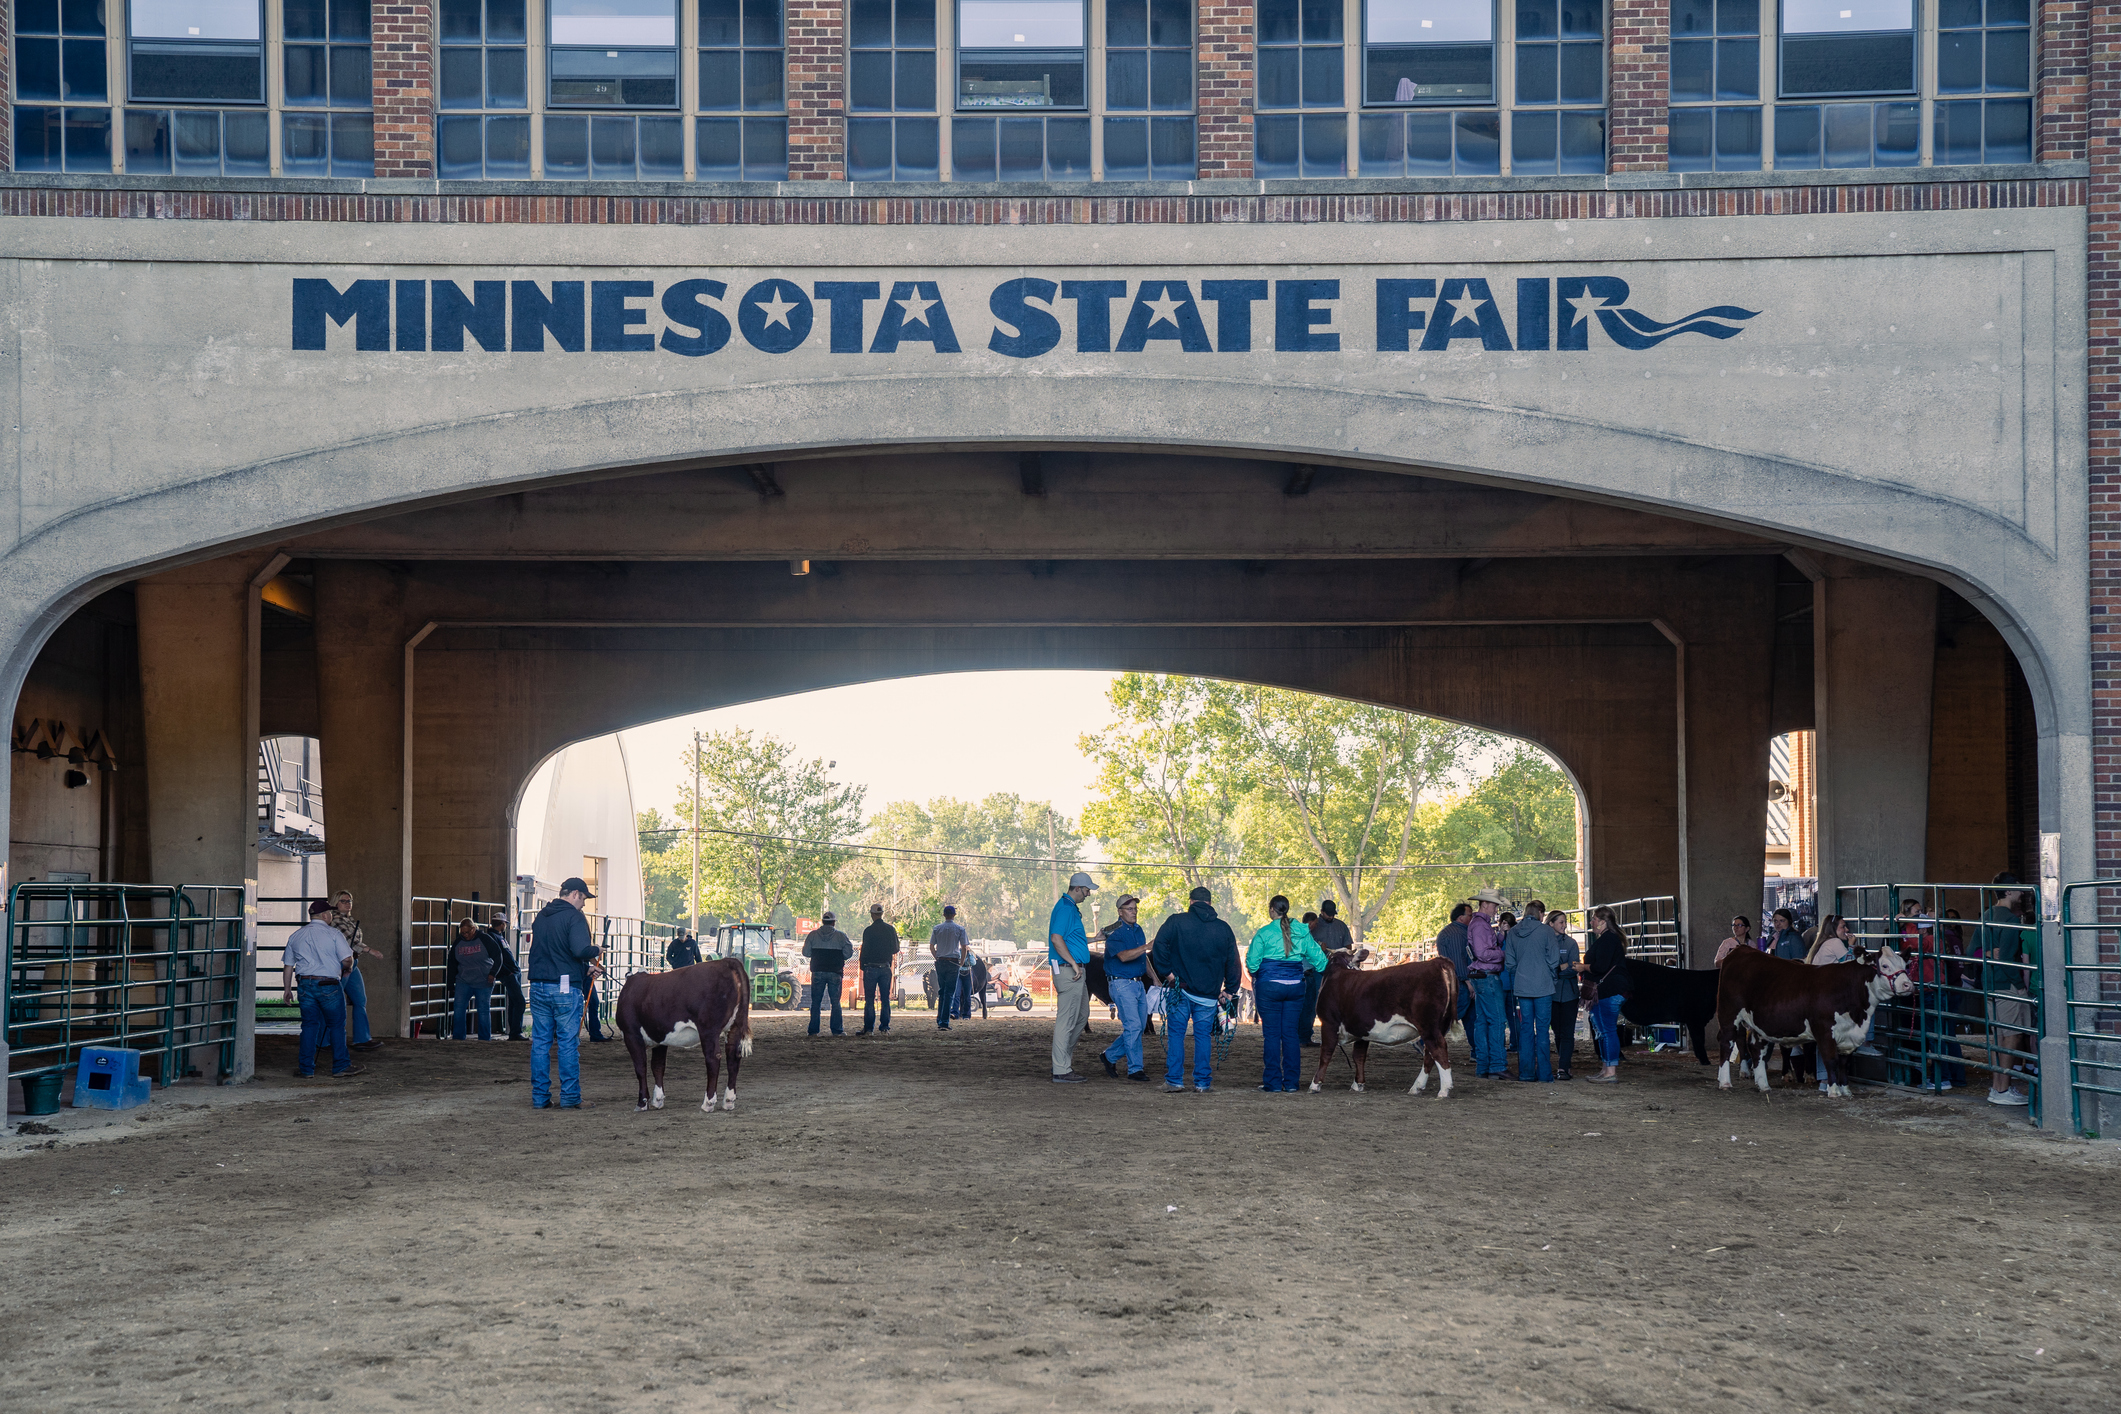 Participants prepare to show cows and cattle in the arena at the Minnesota State Fair (Photo: iStock - Melissa Kopka)